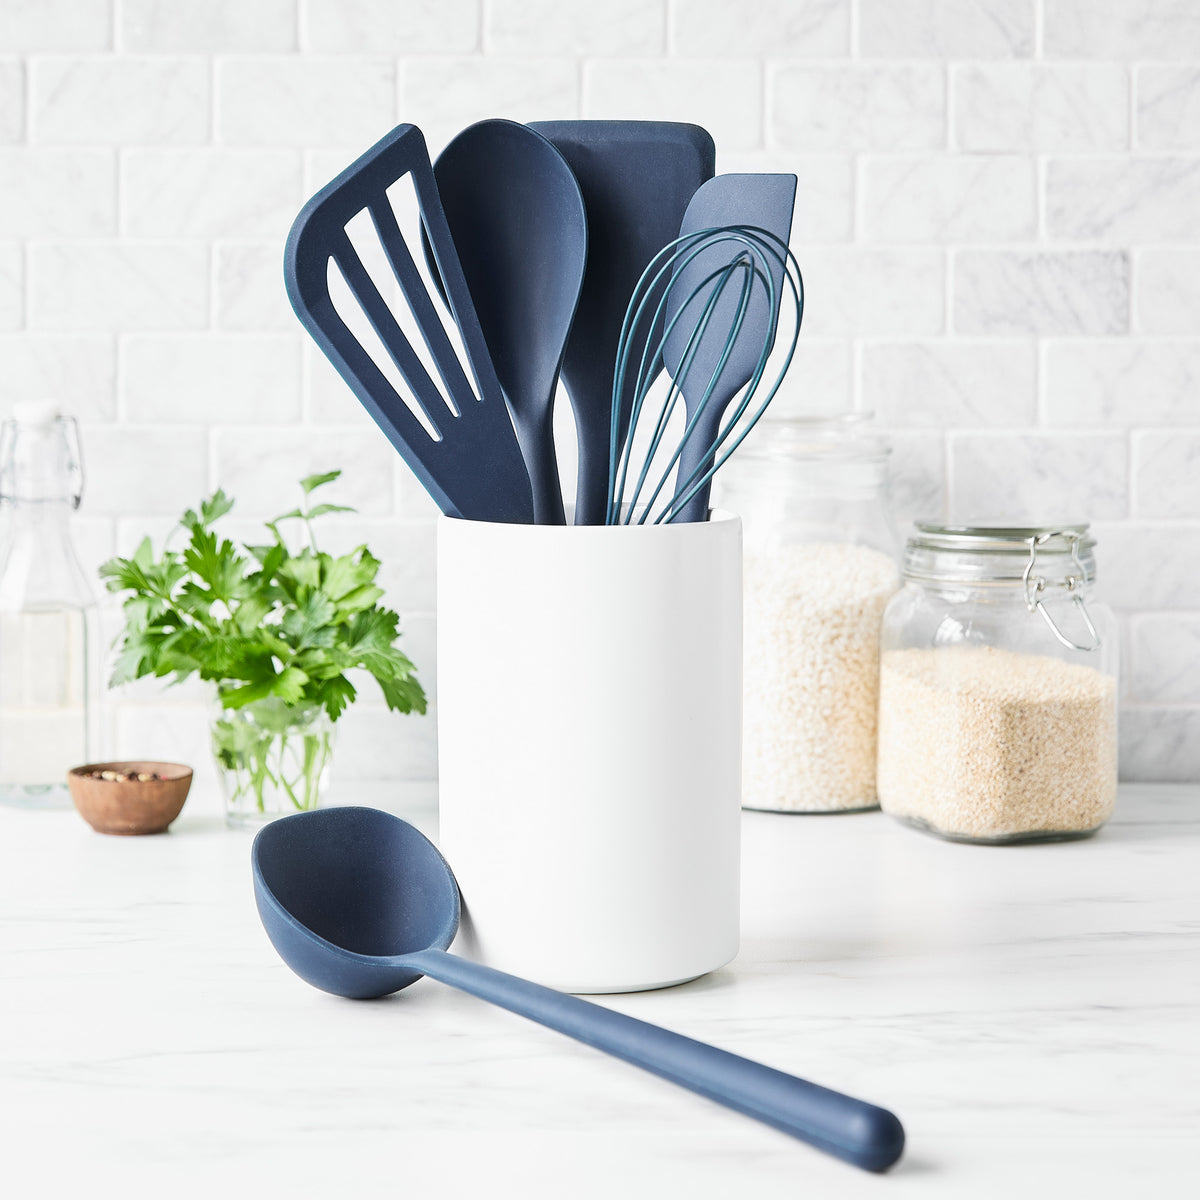 Healthy Non-Toxic PFAS Free Cookware - Platinum Silicone 7-Piece Utensil and Crock Set | Navy by GreenPan